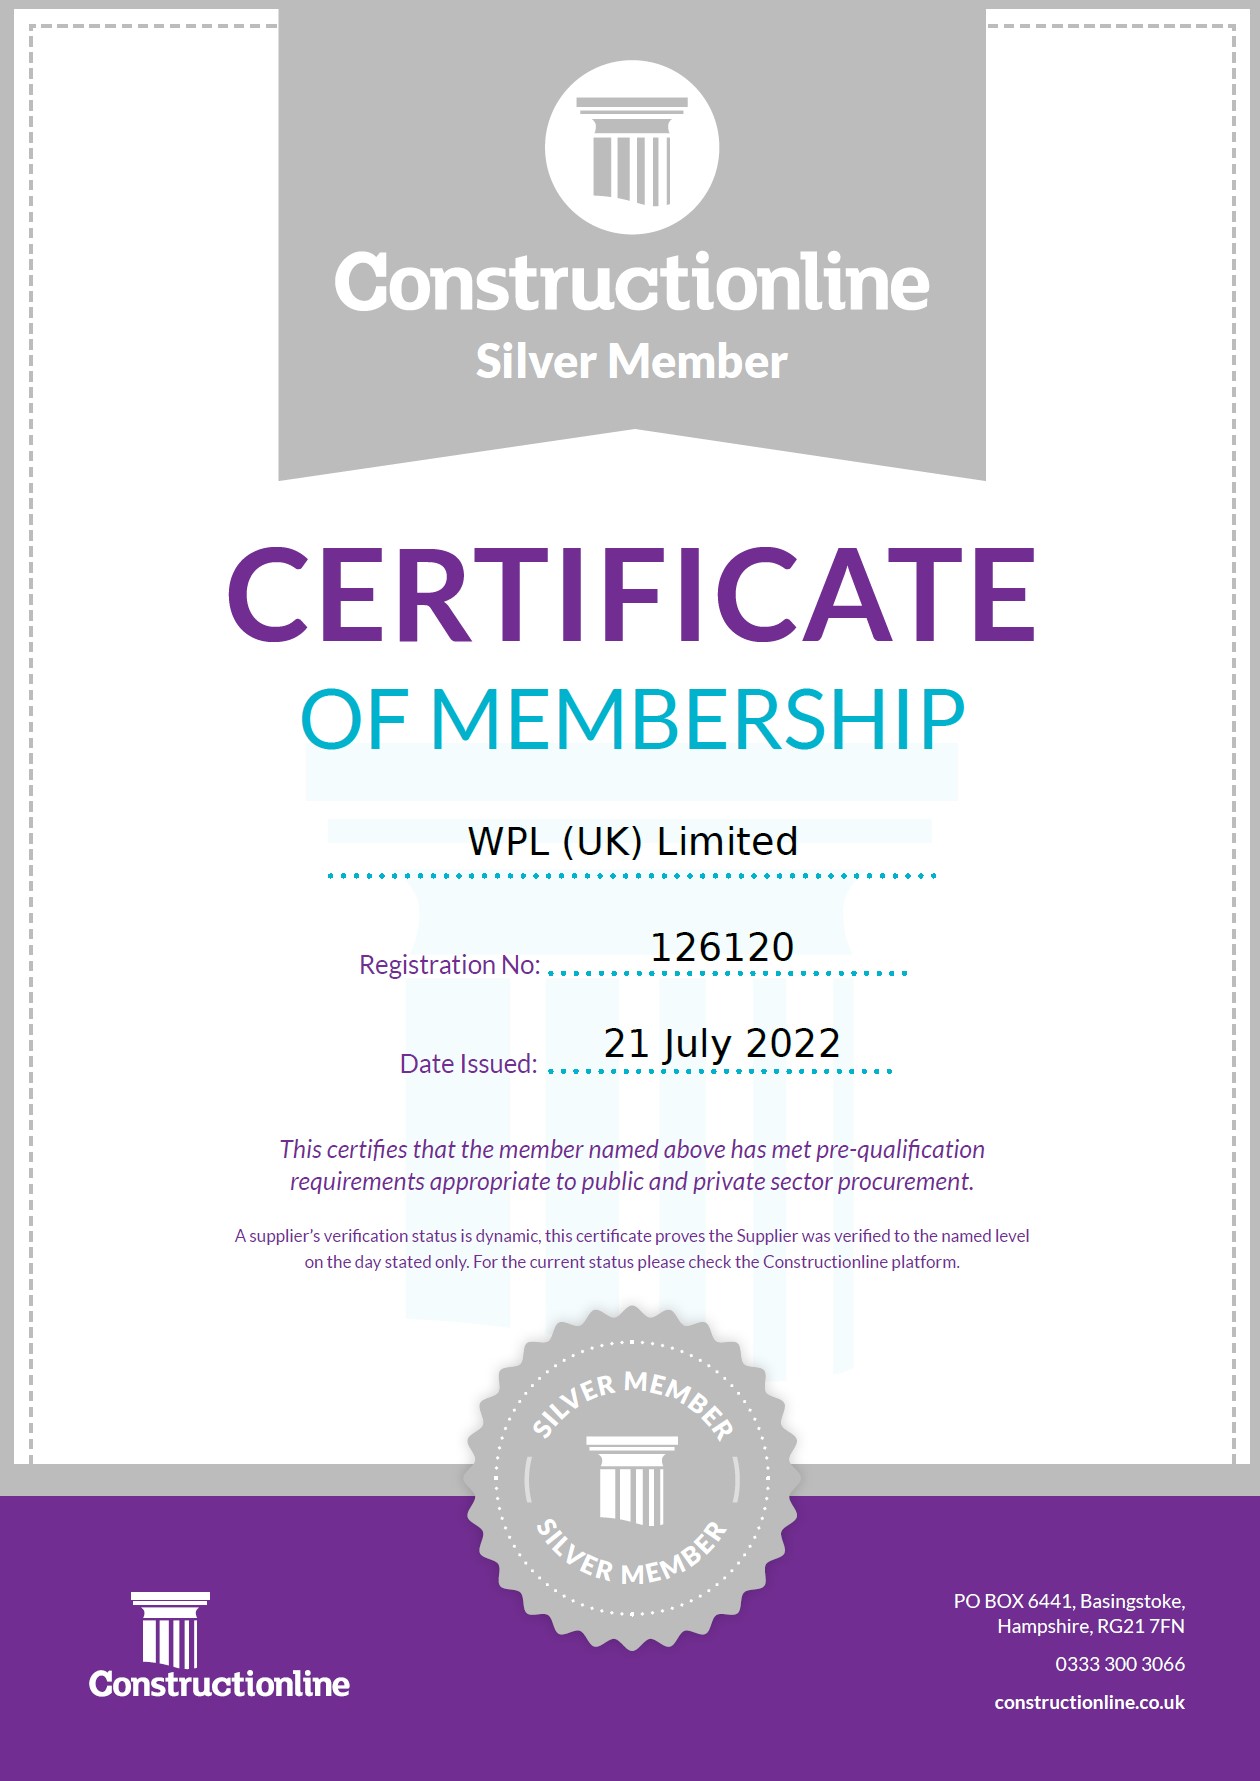 WPLUK Constructionline SILVER Certificate Issued 21st July 2022